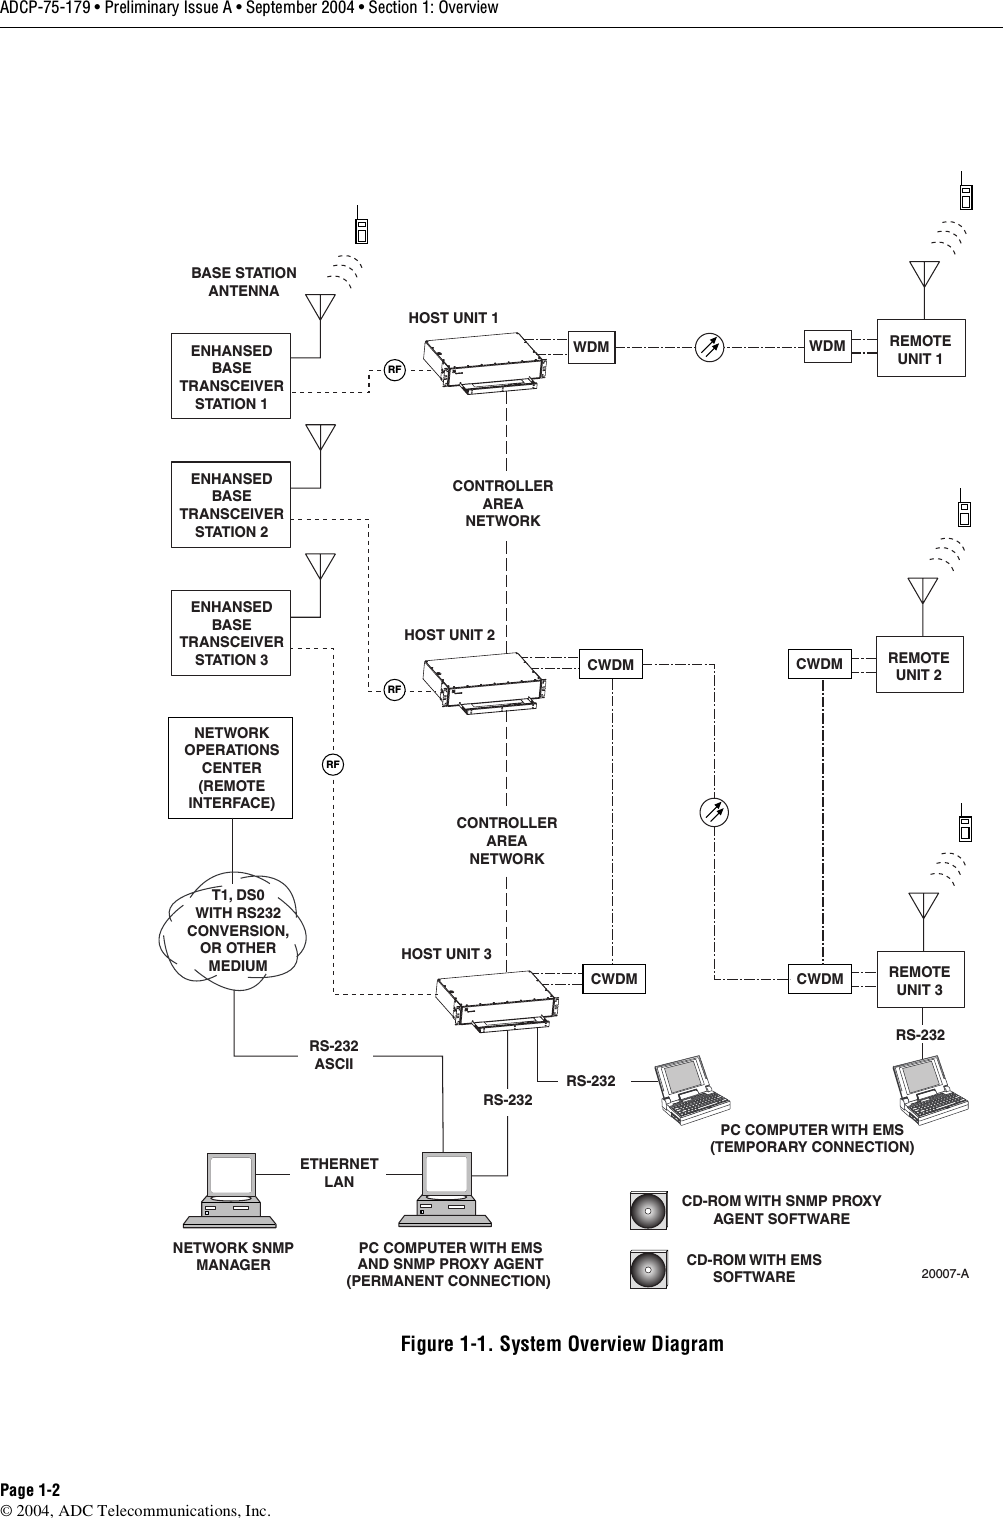 ADCP-75-179 • Preliminary Issue A • September 2004 • Section 1: OverviewPage 1-2© 2004, ADC Telecommunications, Inc.Figure 1-1. System Overview DiagramHOST UNIT 1HOST UNIT 2HOST UNIT 3NETWORKOPERATIONSCENTER(REMOTEINTERFACE)CONTROLLERAREANETWORK20007-ARFRFRFCONTROLLERAREANETWORKCWDMWDM REMOTEUNIT 1REMOTEUNIT 3WDMREMOTEUNIT 2CWDMCWDMCWDMBASE STATIONANTENNAPC COMPUTER WITH EMSAND SNMP PROXY AGENT(PERMANENT CONNECTION) RS-232ASCIIRS-232CD-ROM WITH EMSSOFTWARENETWORK SNMPMANAGERCD-ROM WITH SNMP PROXYAGENT SOFTWAREETHERNETLANPC COMPUTER WITH EMS(TEMPORARY CONNECTION)T1, DS0WITH RS232CONVERSION,OR OTHERMEDIUMRS-232RS-232ENHANSEDBASETRANSCEIVERSTATION 1ENHANSEDBASETRANSCEIVERSTATION 2ENHANSEDBASETRANSCEIVERSTATION 3